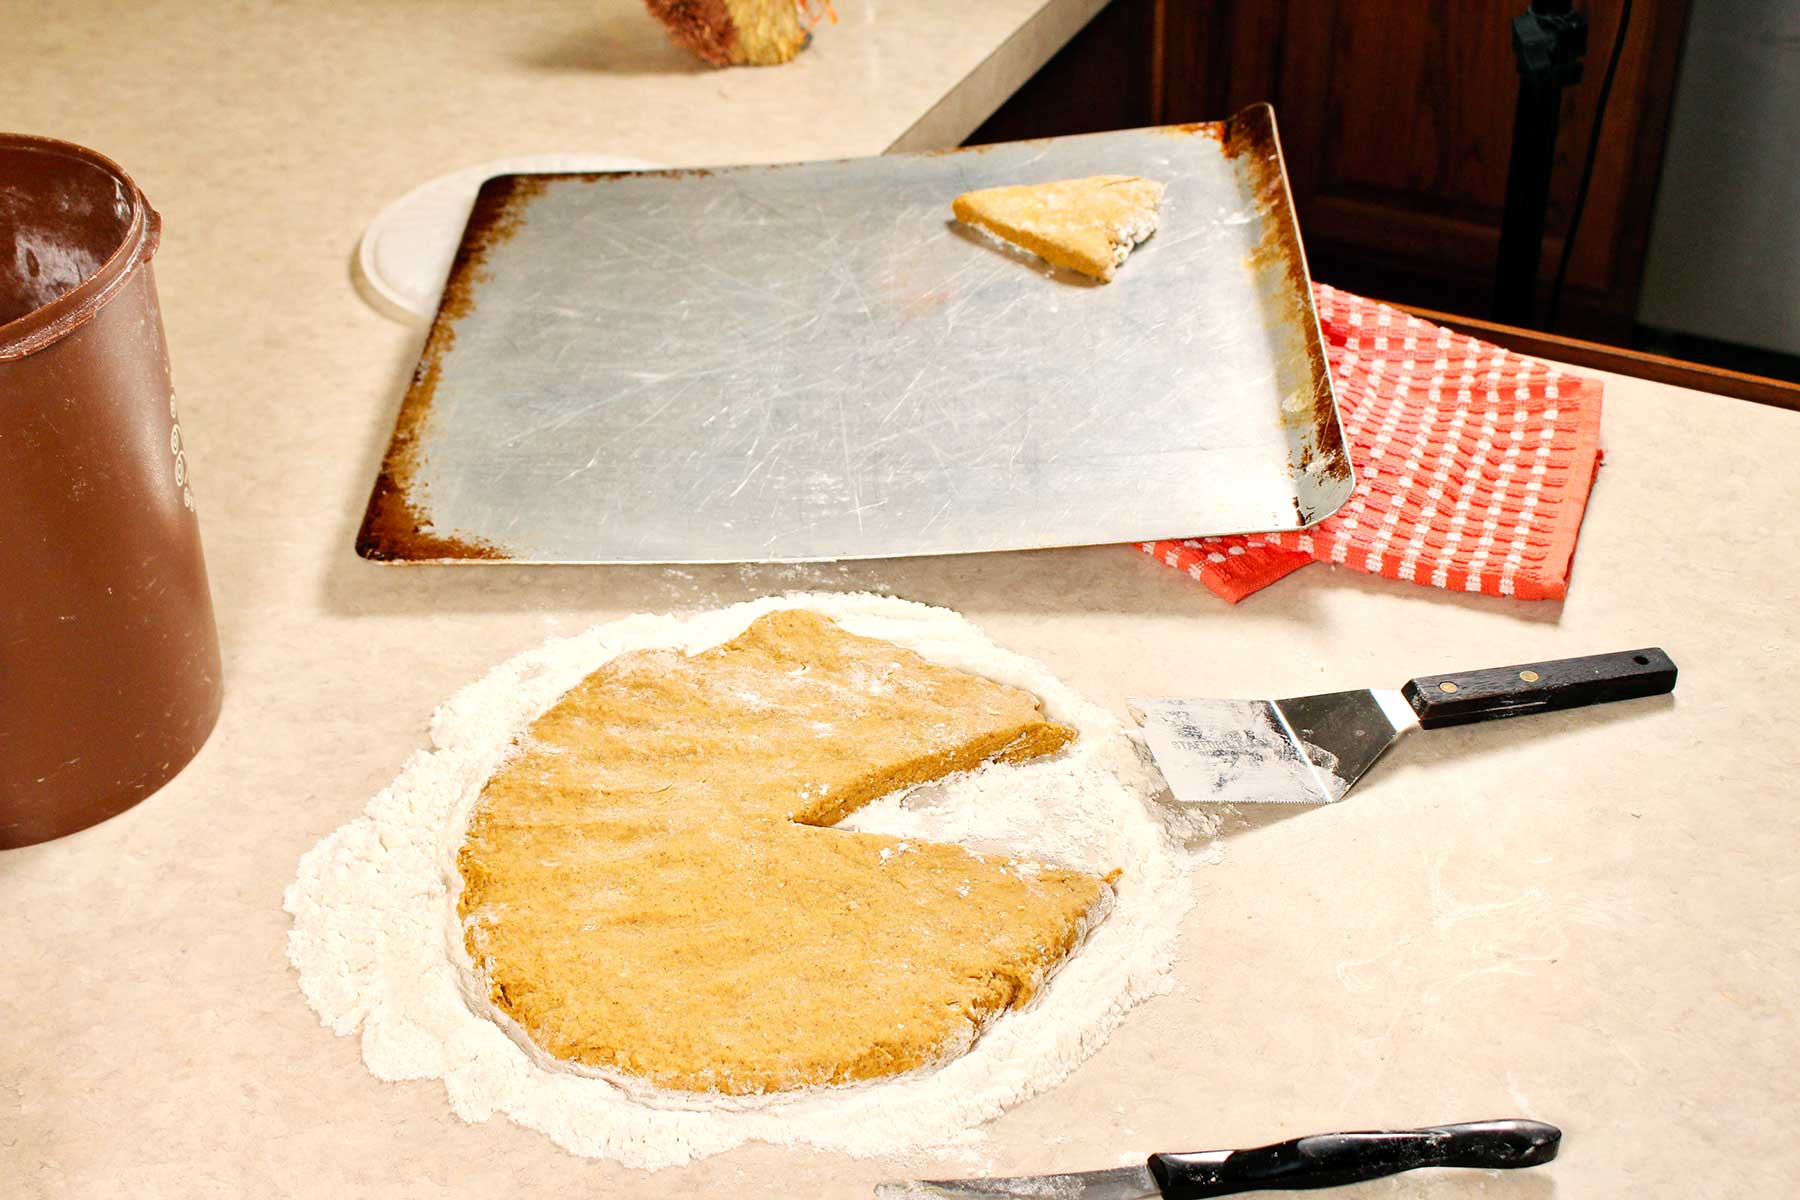 Circular shaped dough with pie shaped piece missing with tray and scone on it in the background.